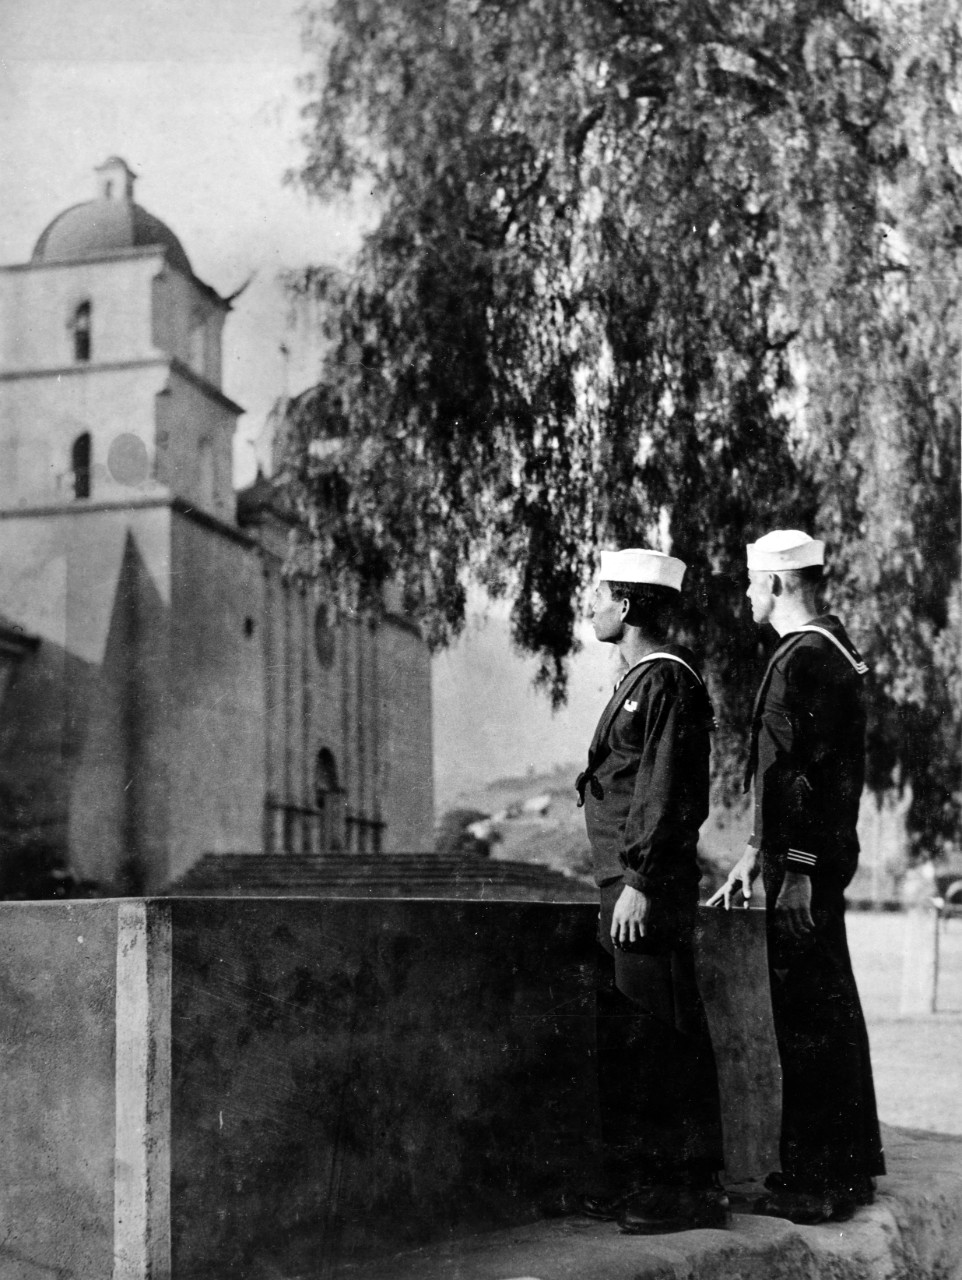 Men of the Pacific Fleet on a visit to the Santa Barbara Mission